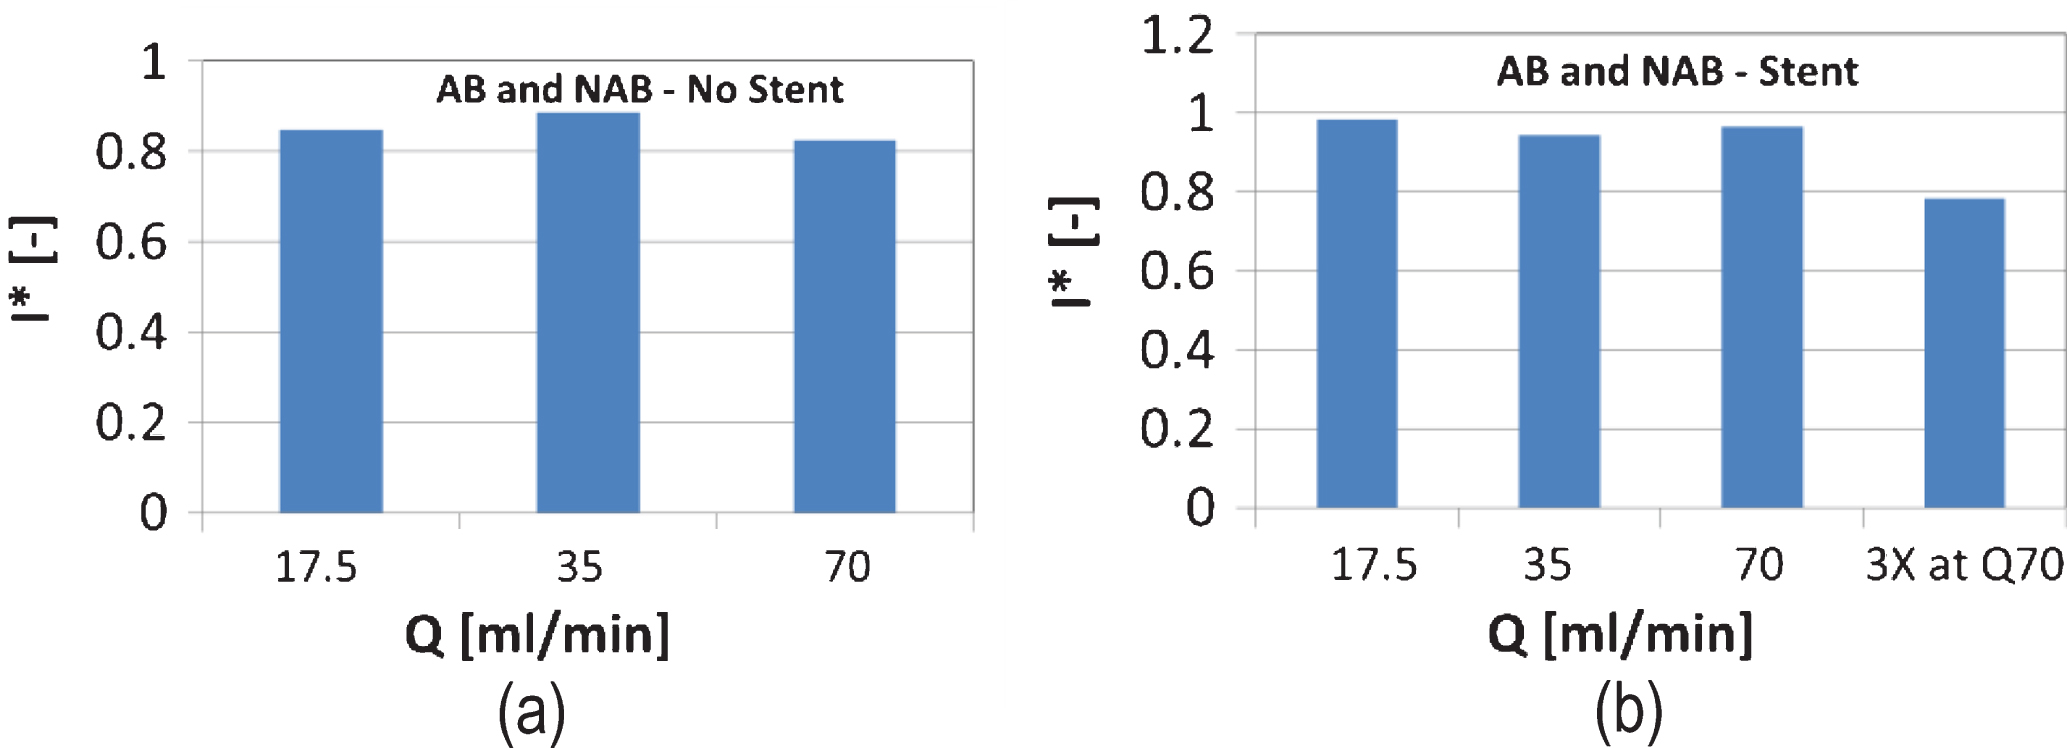 Mean normalized image intensity ratio of the supernatant (plasma or PBS), to the sediment (RBCs) part of the sample, calculated from images of the samples in the Eppendorf tubes. I* is shown in Panel (a) as an average for both AB and NAB samples in the non-stented cases. Results for the stented cases is shown in Panel (b).